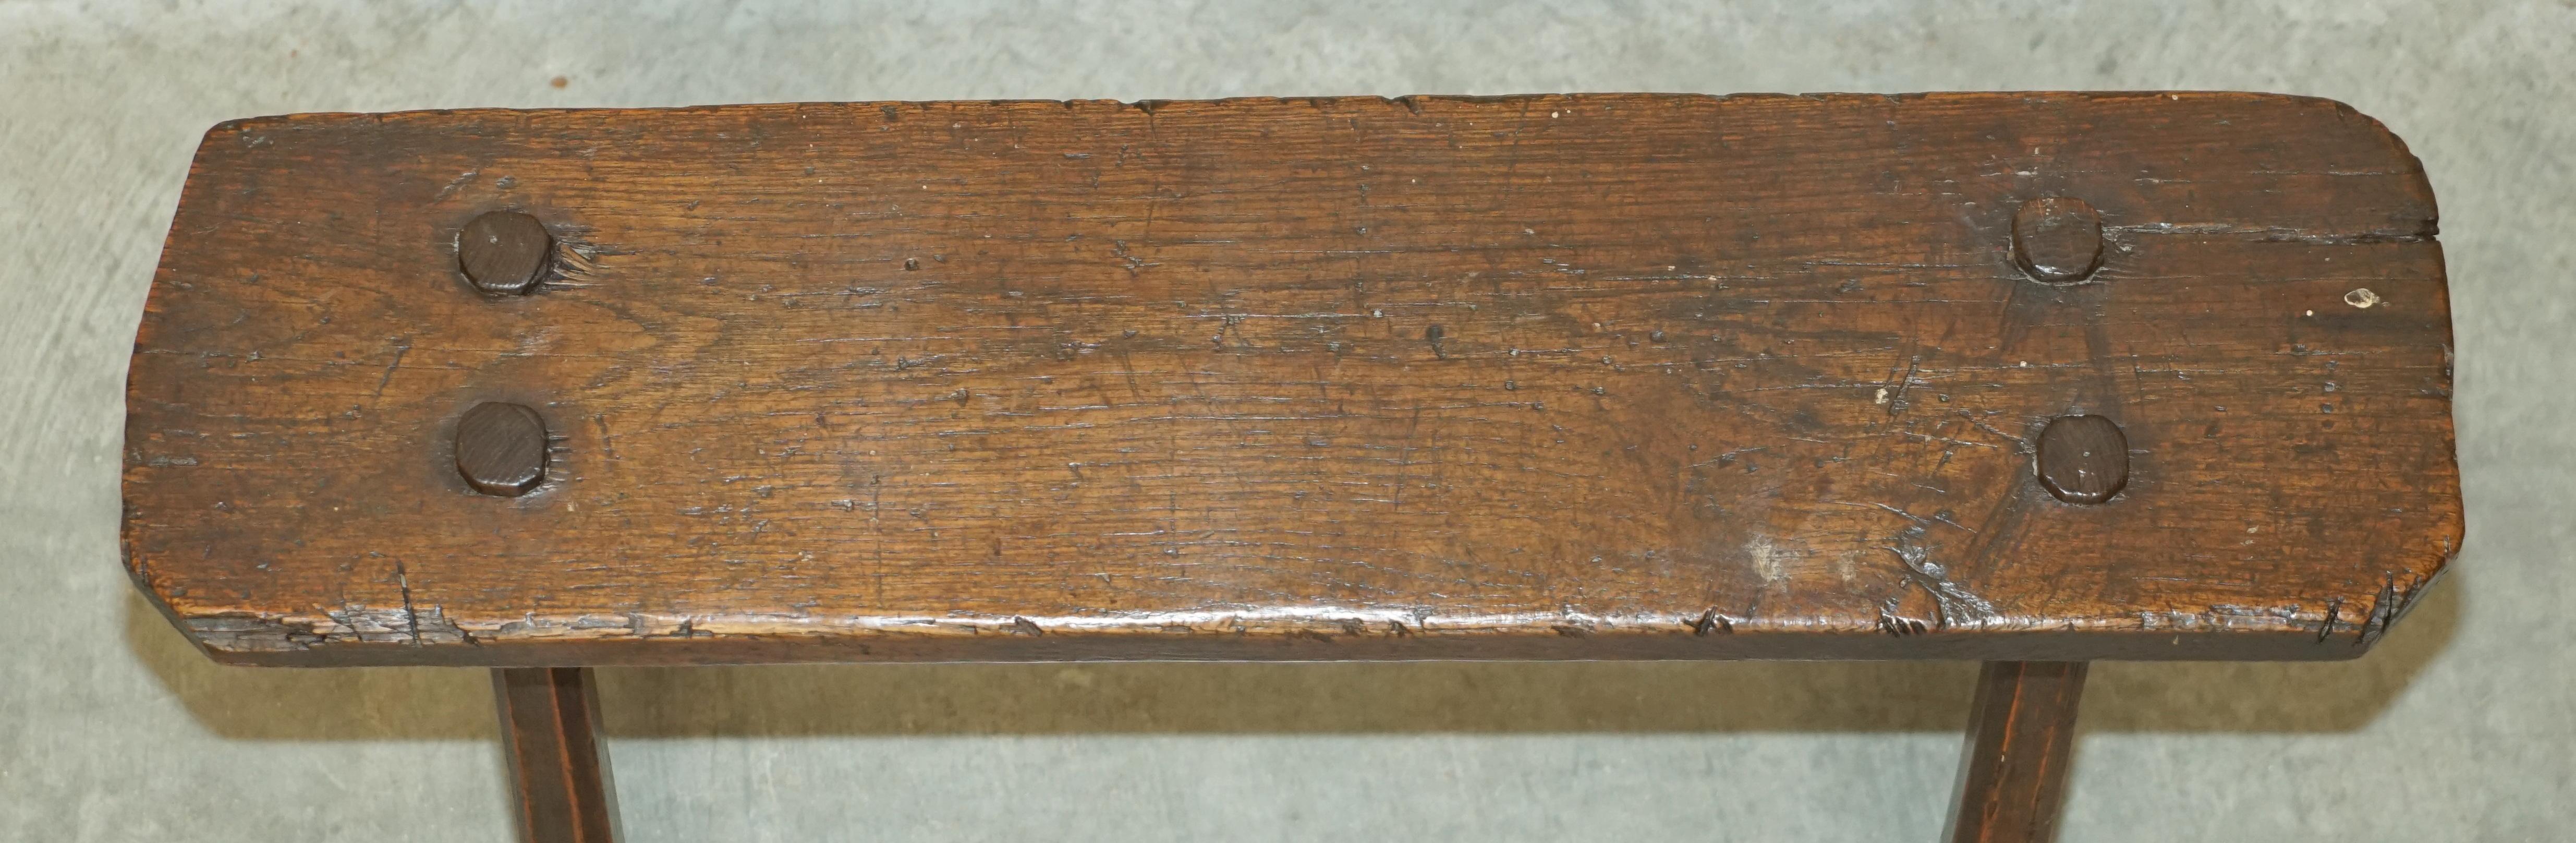 PRIMITIVE ANTiQUE 1800 SPANISH 18TH CENTURY FOUR LEGGED BENCH OR COFFEE TABLE For Sale 8